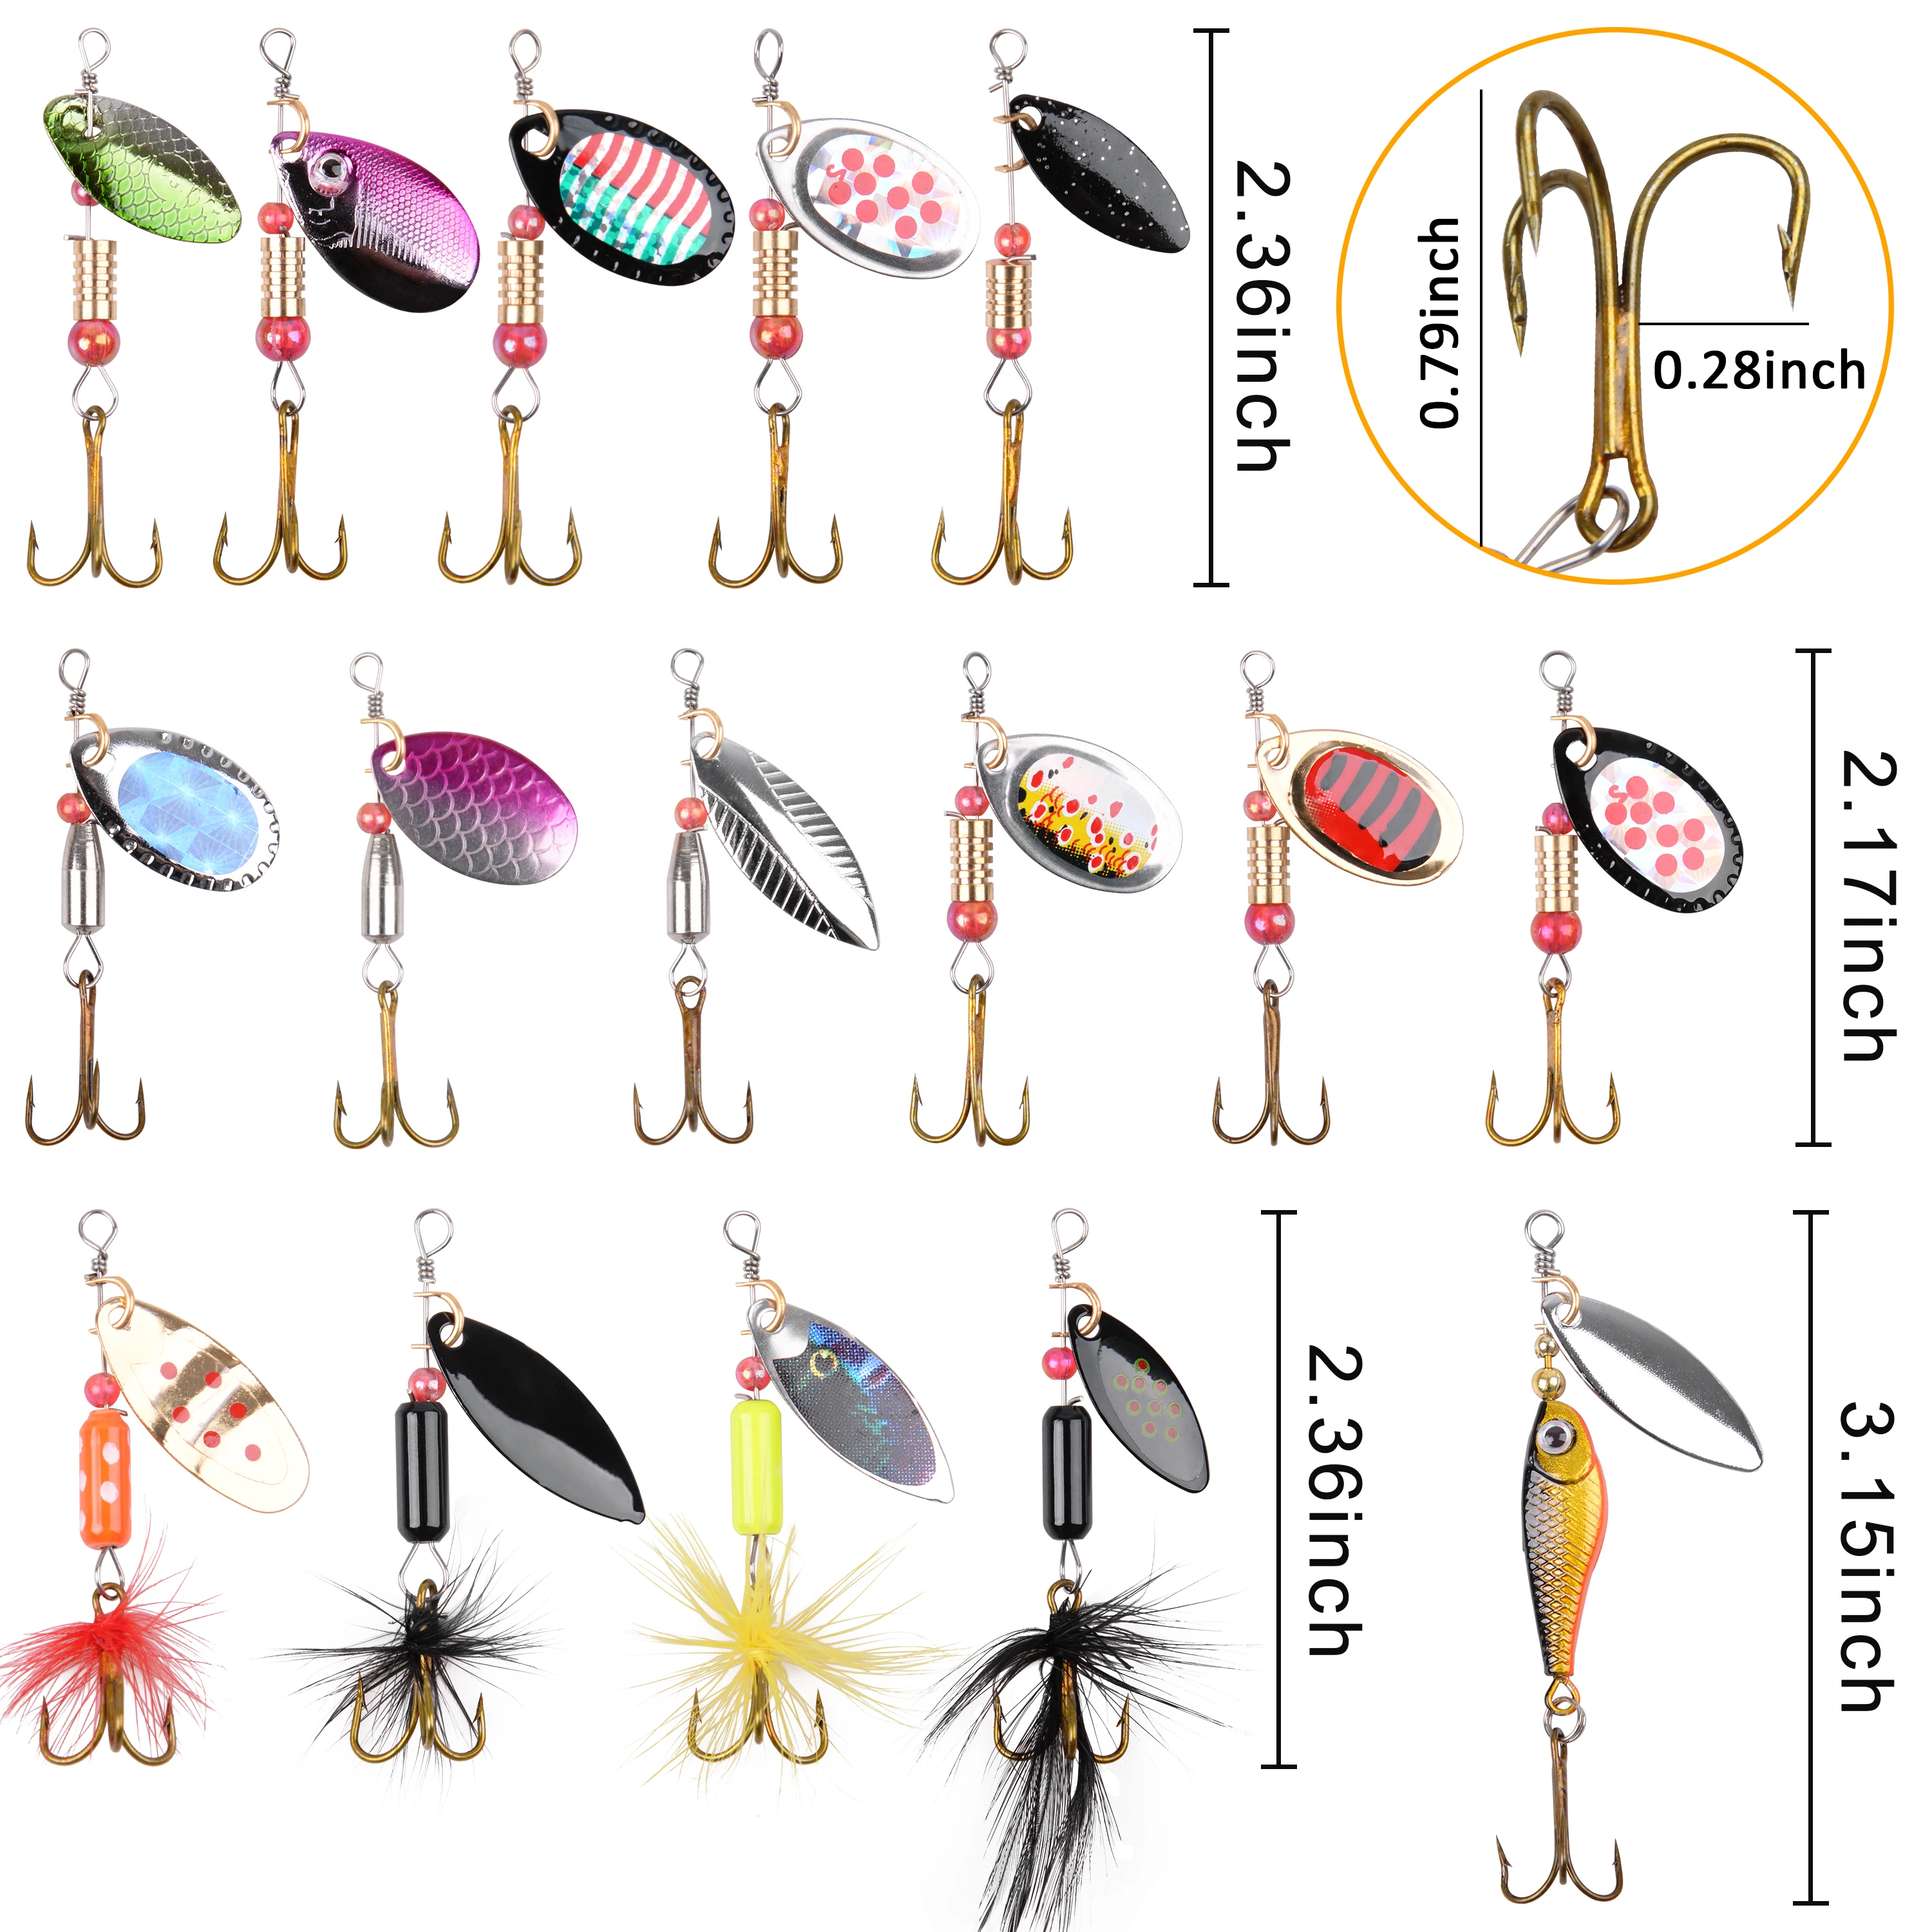 16pcs/Bag Fishing Lures For Bass Spinner Lures With Portable Carry